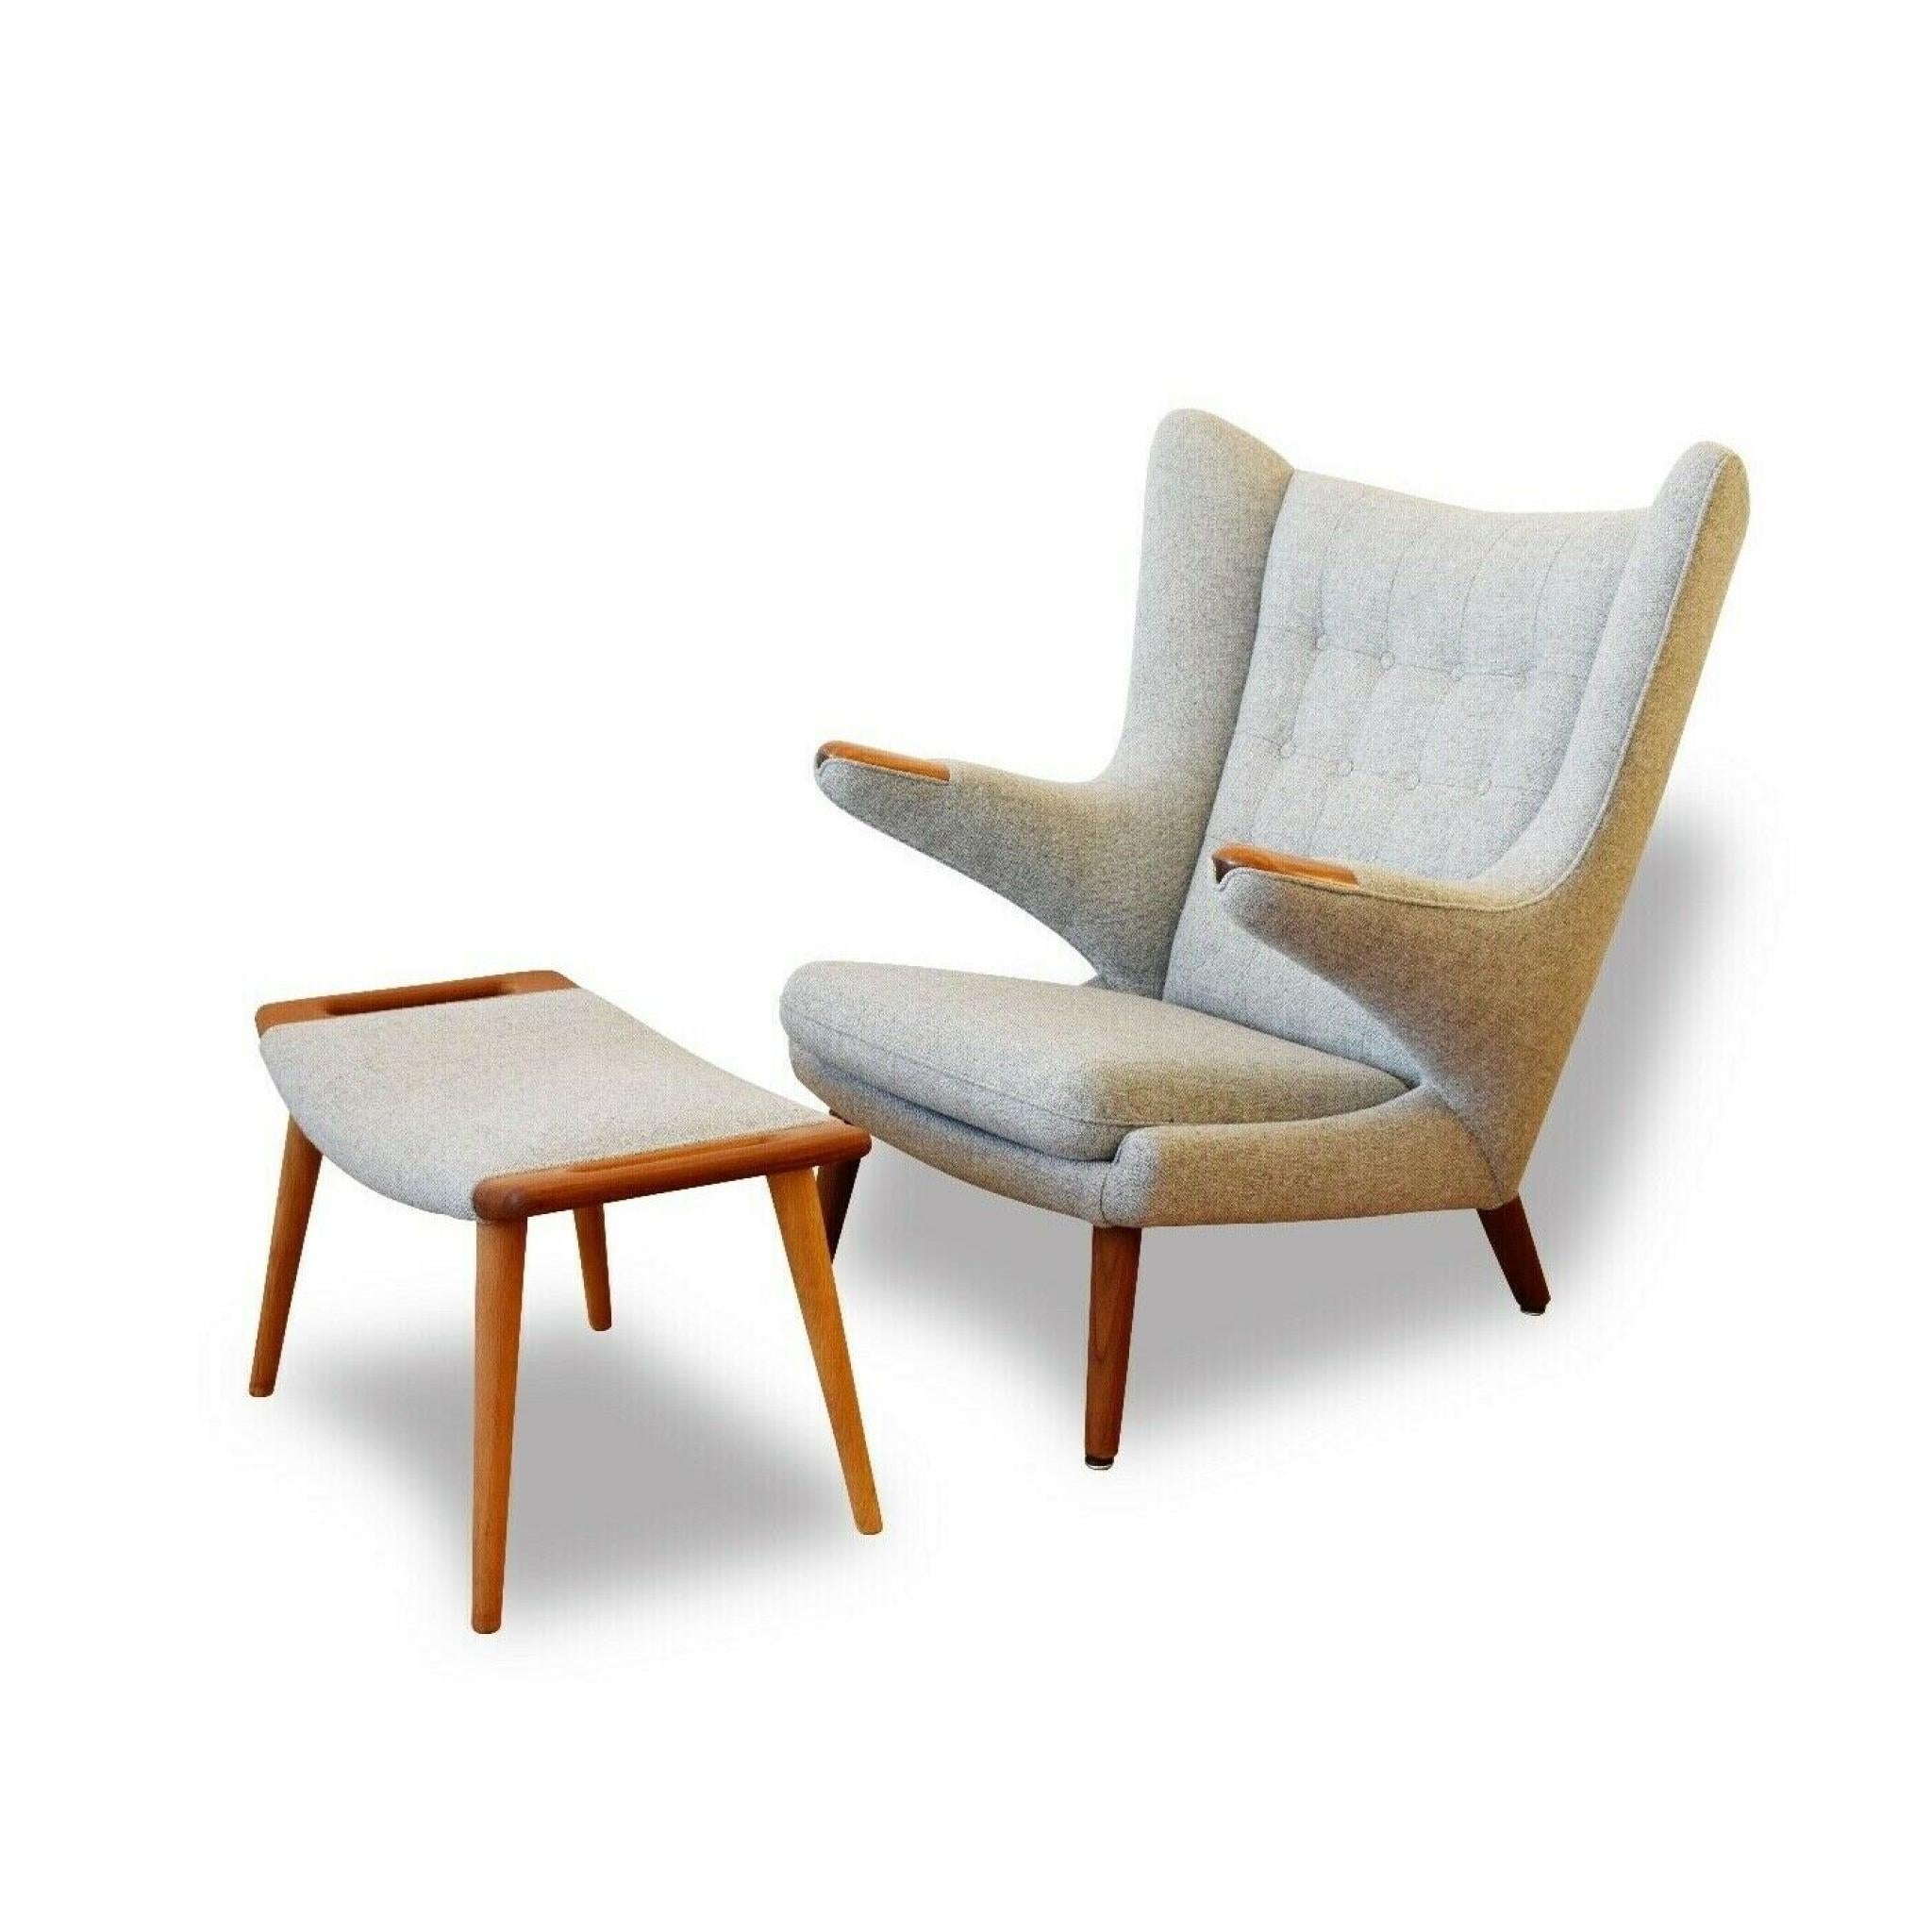 Model AP-19 papa bear oak chair & ottoman set by Hans J. Wegner for A.P. Stolen, 1953
The papa bear chair is one of Wegner's most iconic and popular designs. 
It was produced by A.P. Stolen in Denmark in the 1950's. This piece has beautiful oak